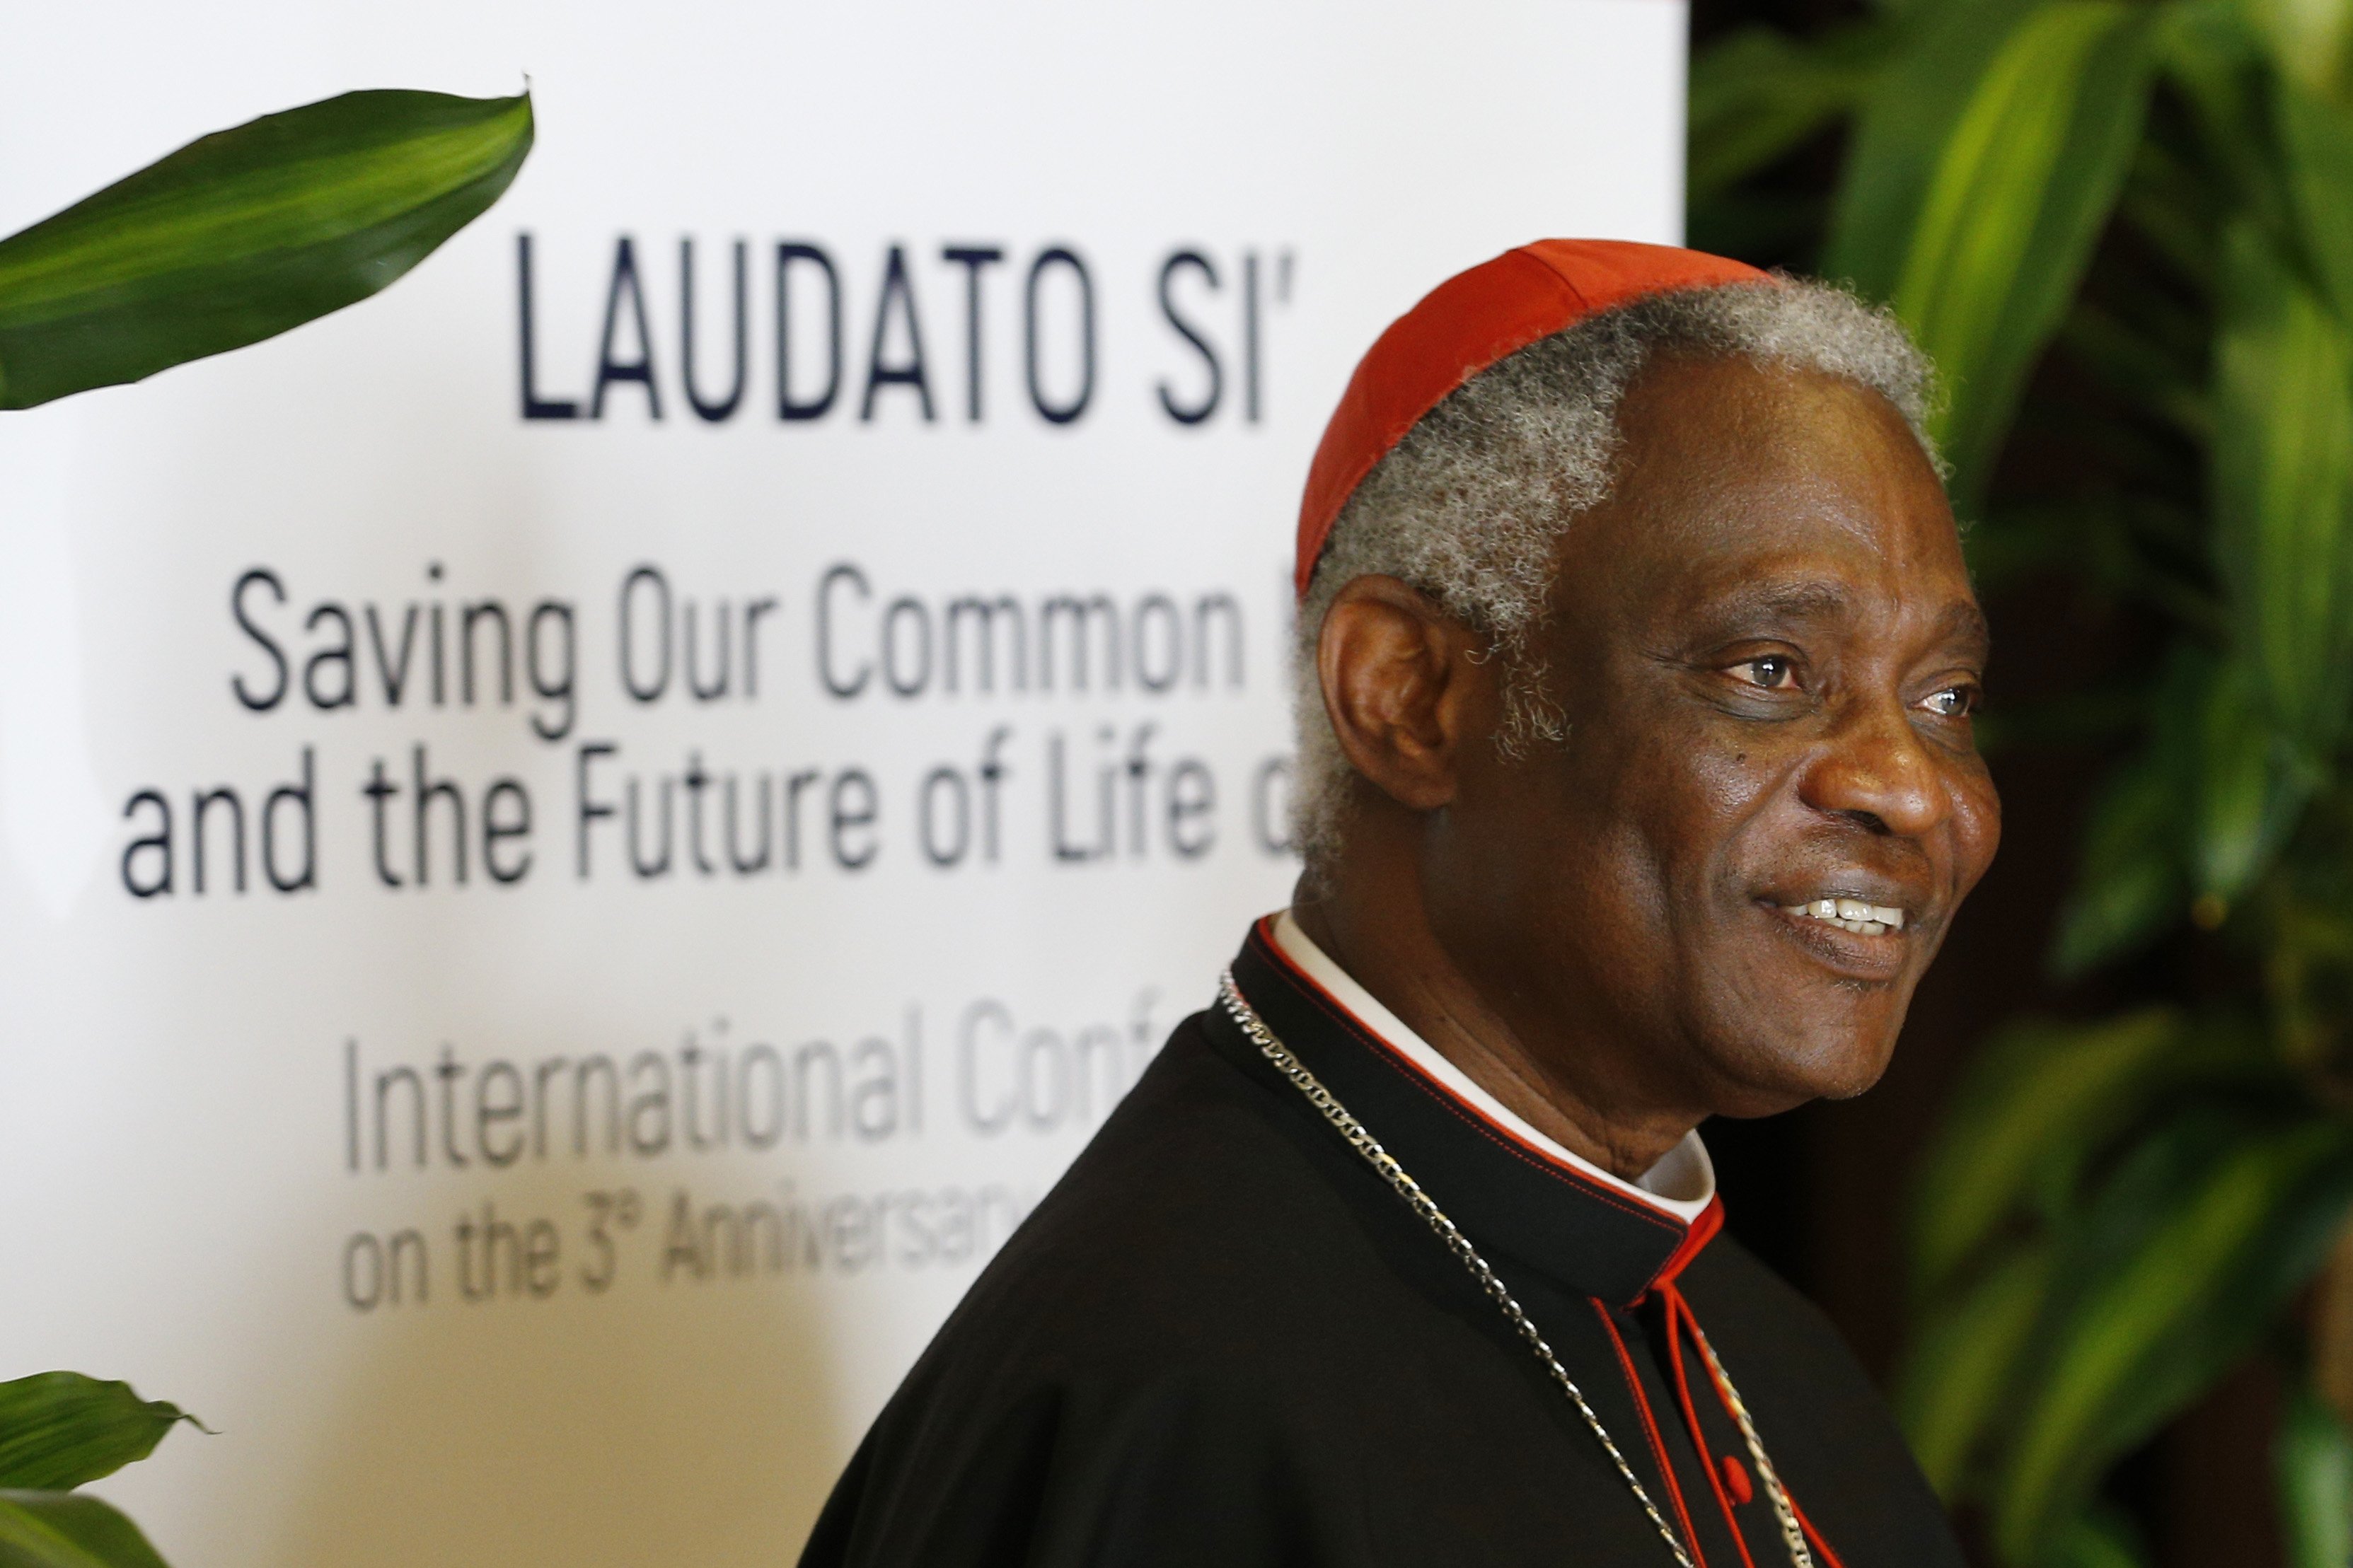 Cardinal Peter Turkson is pictured at a conference marking the third anniversary of Pope Francis' encyclical, "Laudato Si'," at the Vatican in this July 5, 2018, file photo. (CNS photo/Paul Haring)